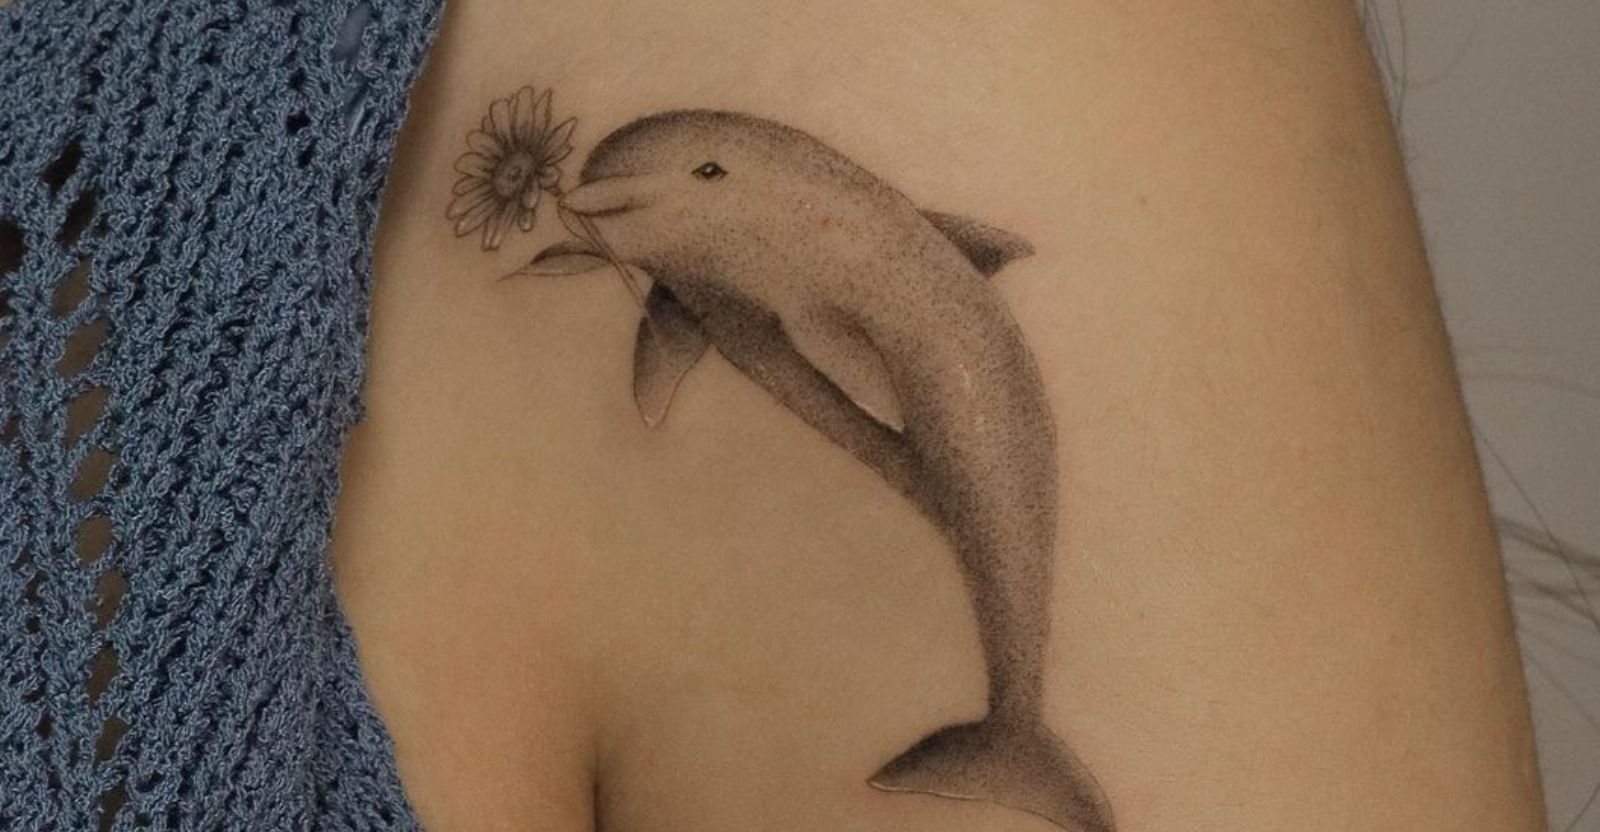 UV Ink dolphin tattoo located on the wrist.